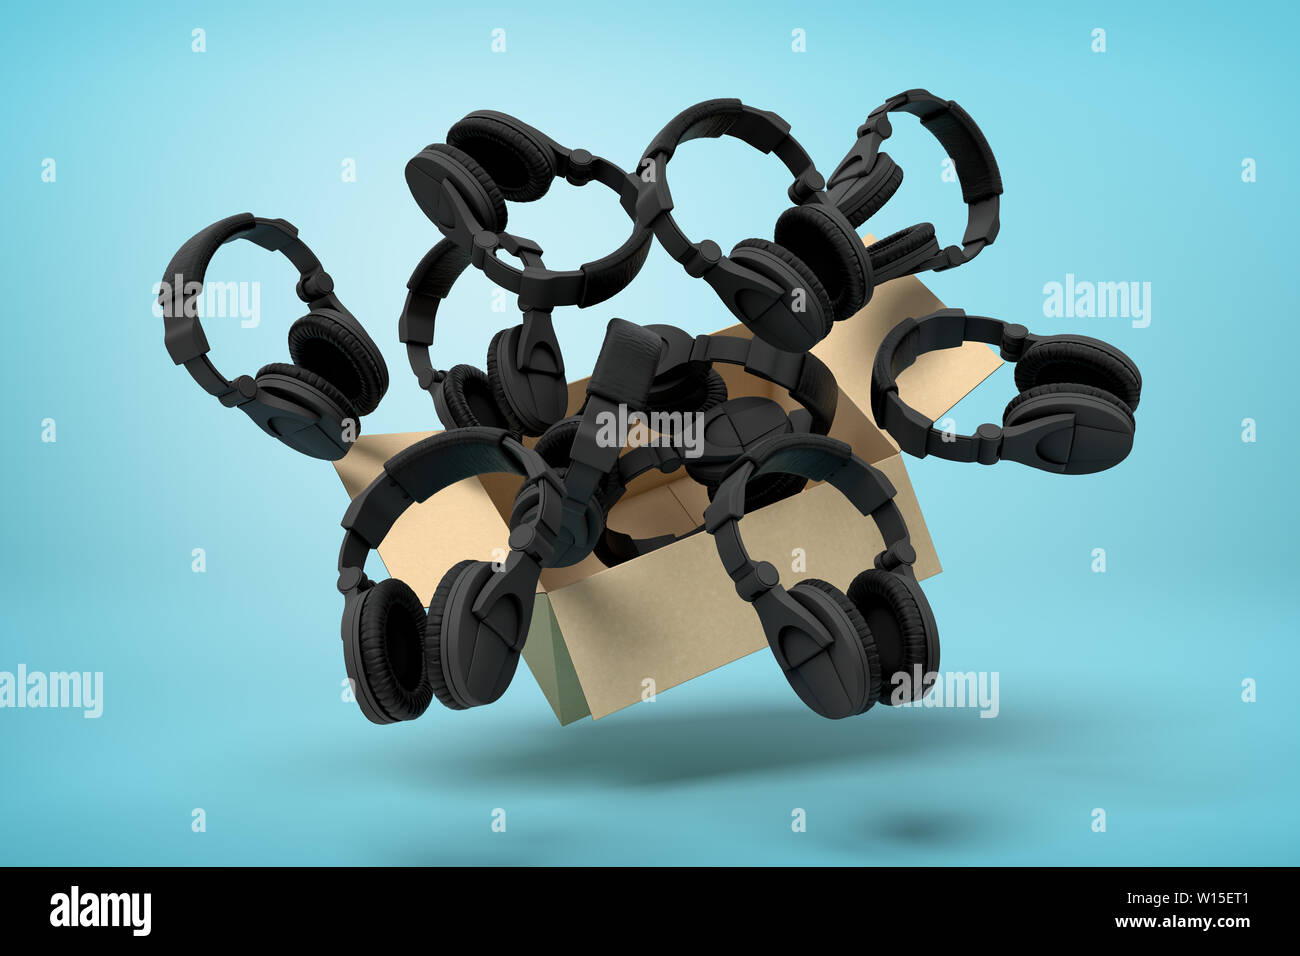 3d rendering of cardboard box in air full of black headphones which are flying out and floating outside on blue background. Stock Photo